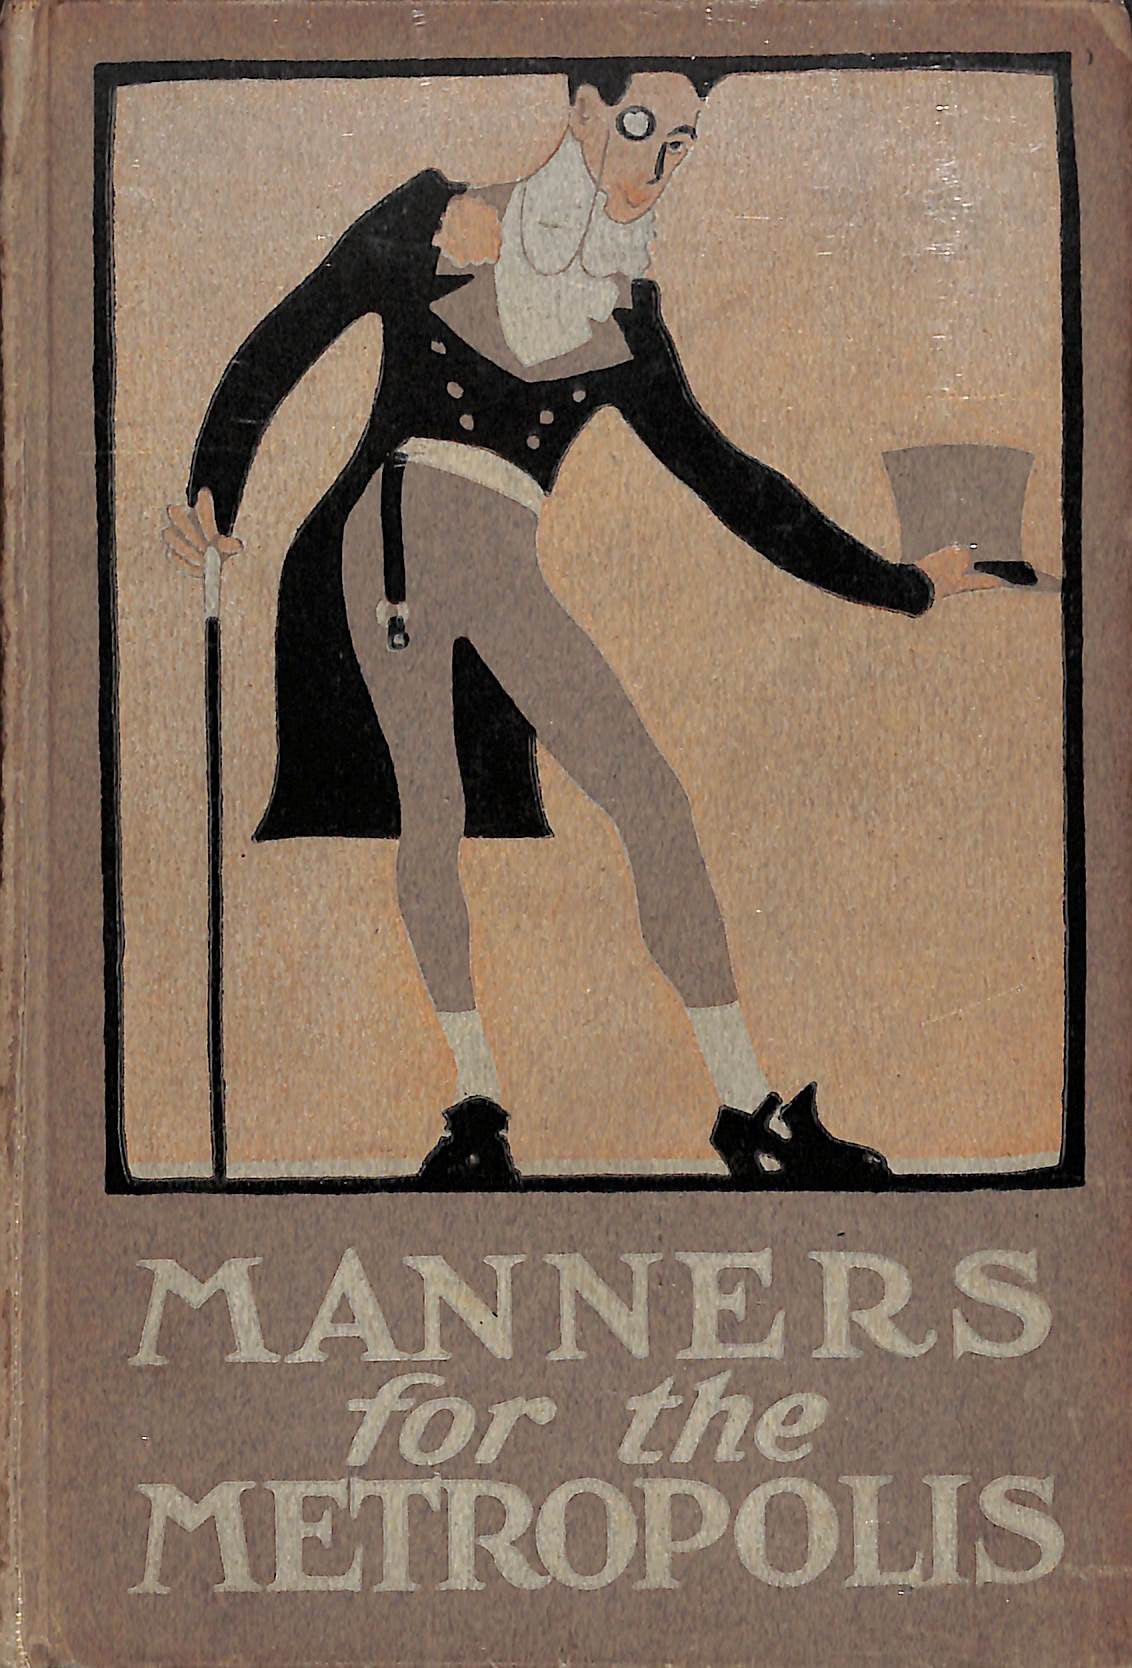 "Manners For The Metropolis" 1909 CROWNINSHIELD, Francis W.